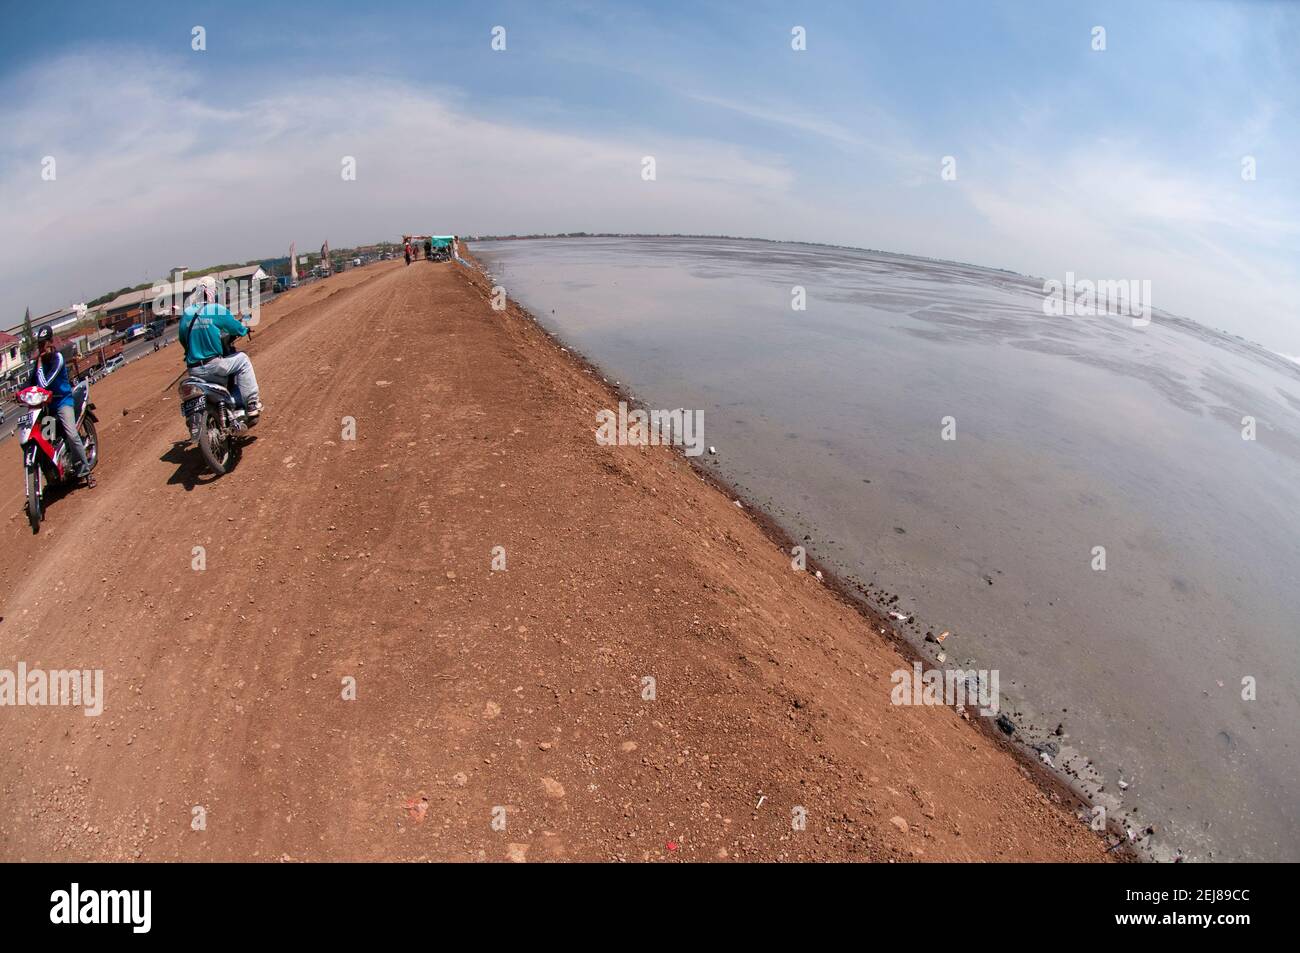 People riding motorbikes on levee surrounding mud lake environmental disaster which developed after drilling incident, Porong Sidoarjo, near Surabaya, Stock Photo